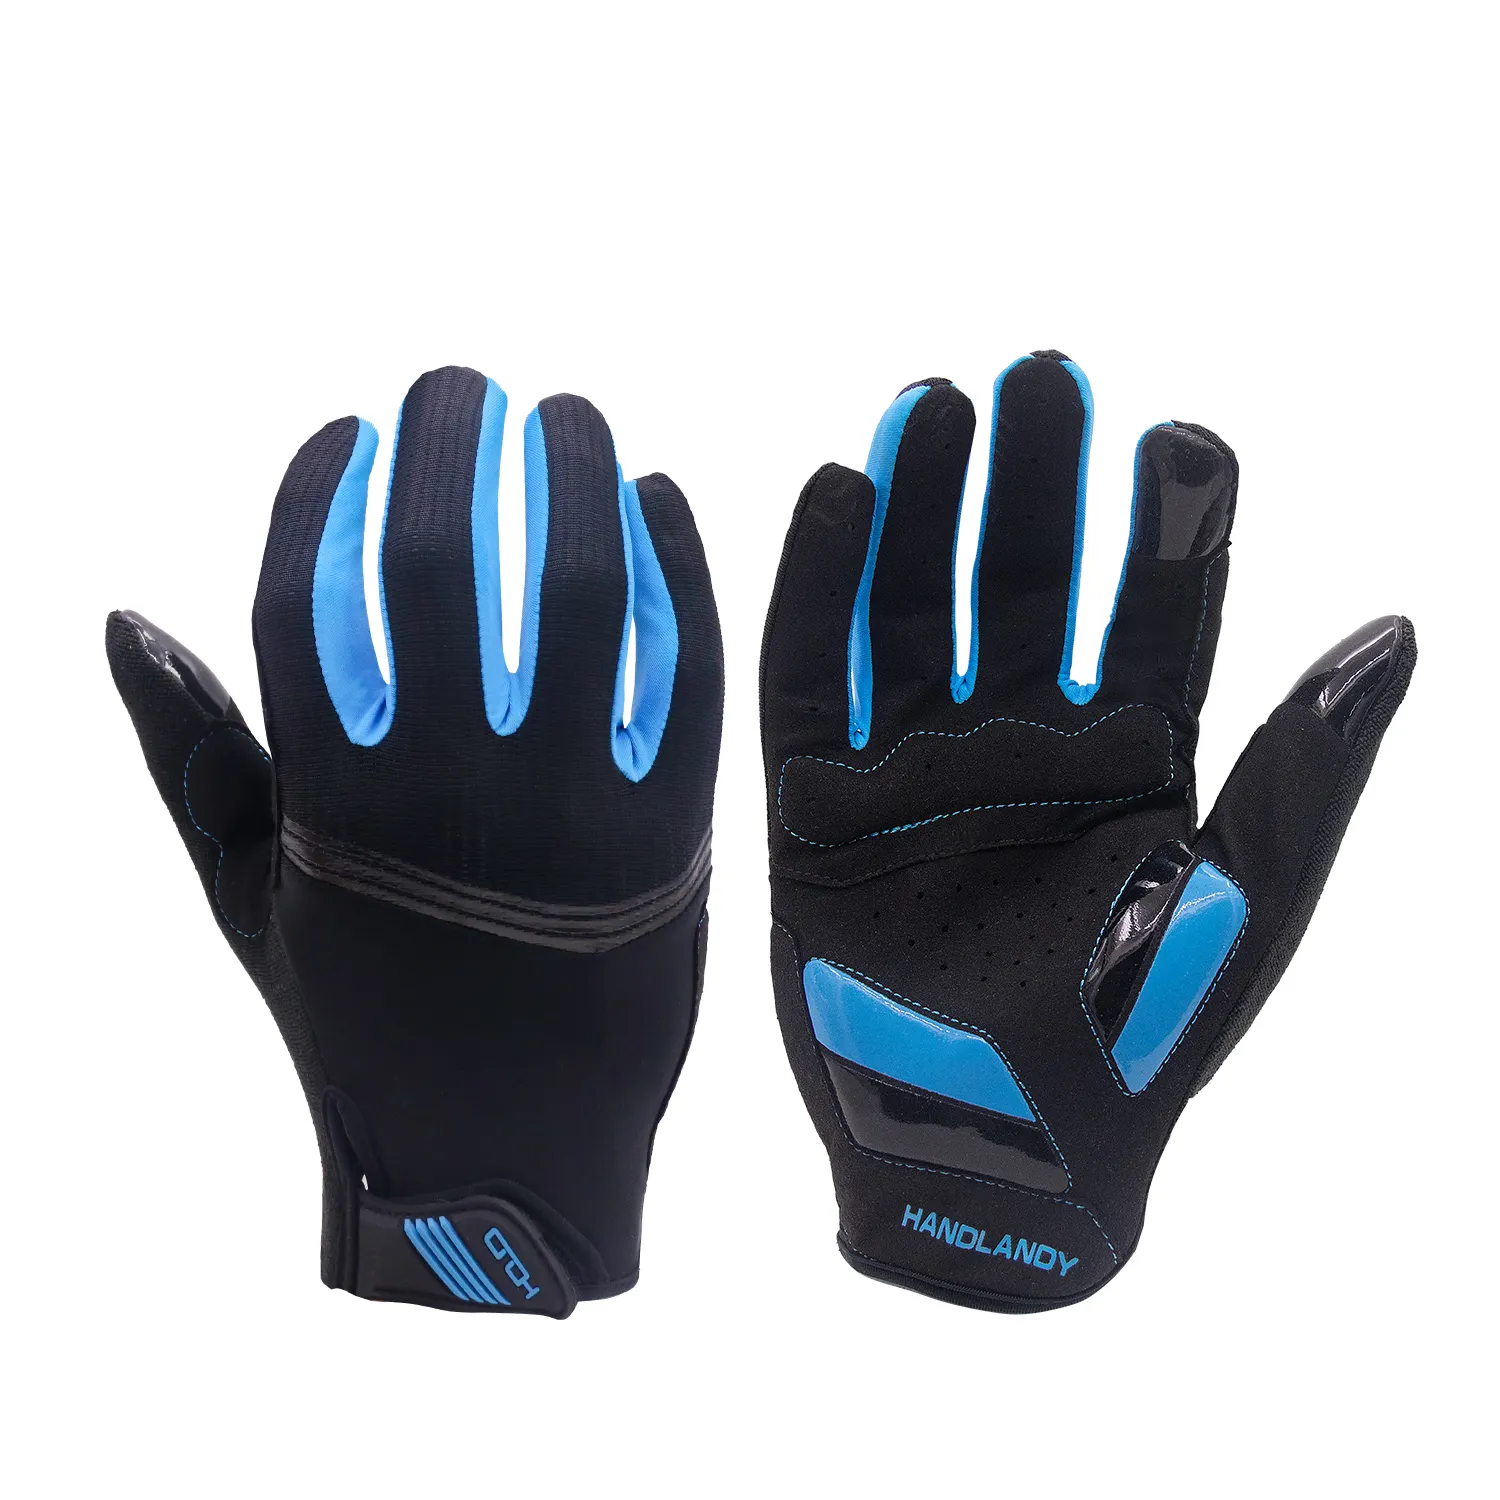 HANDLANDY Breathable Fabric UPF 50 Sun Protective Sport Gloves Full Finger Touch Screen Anti-slip Bicycle Cycling Gloves